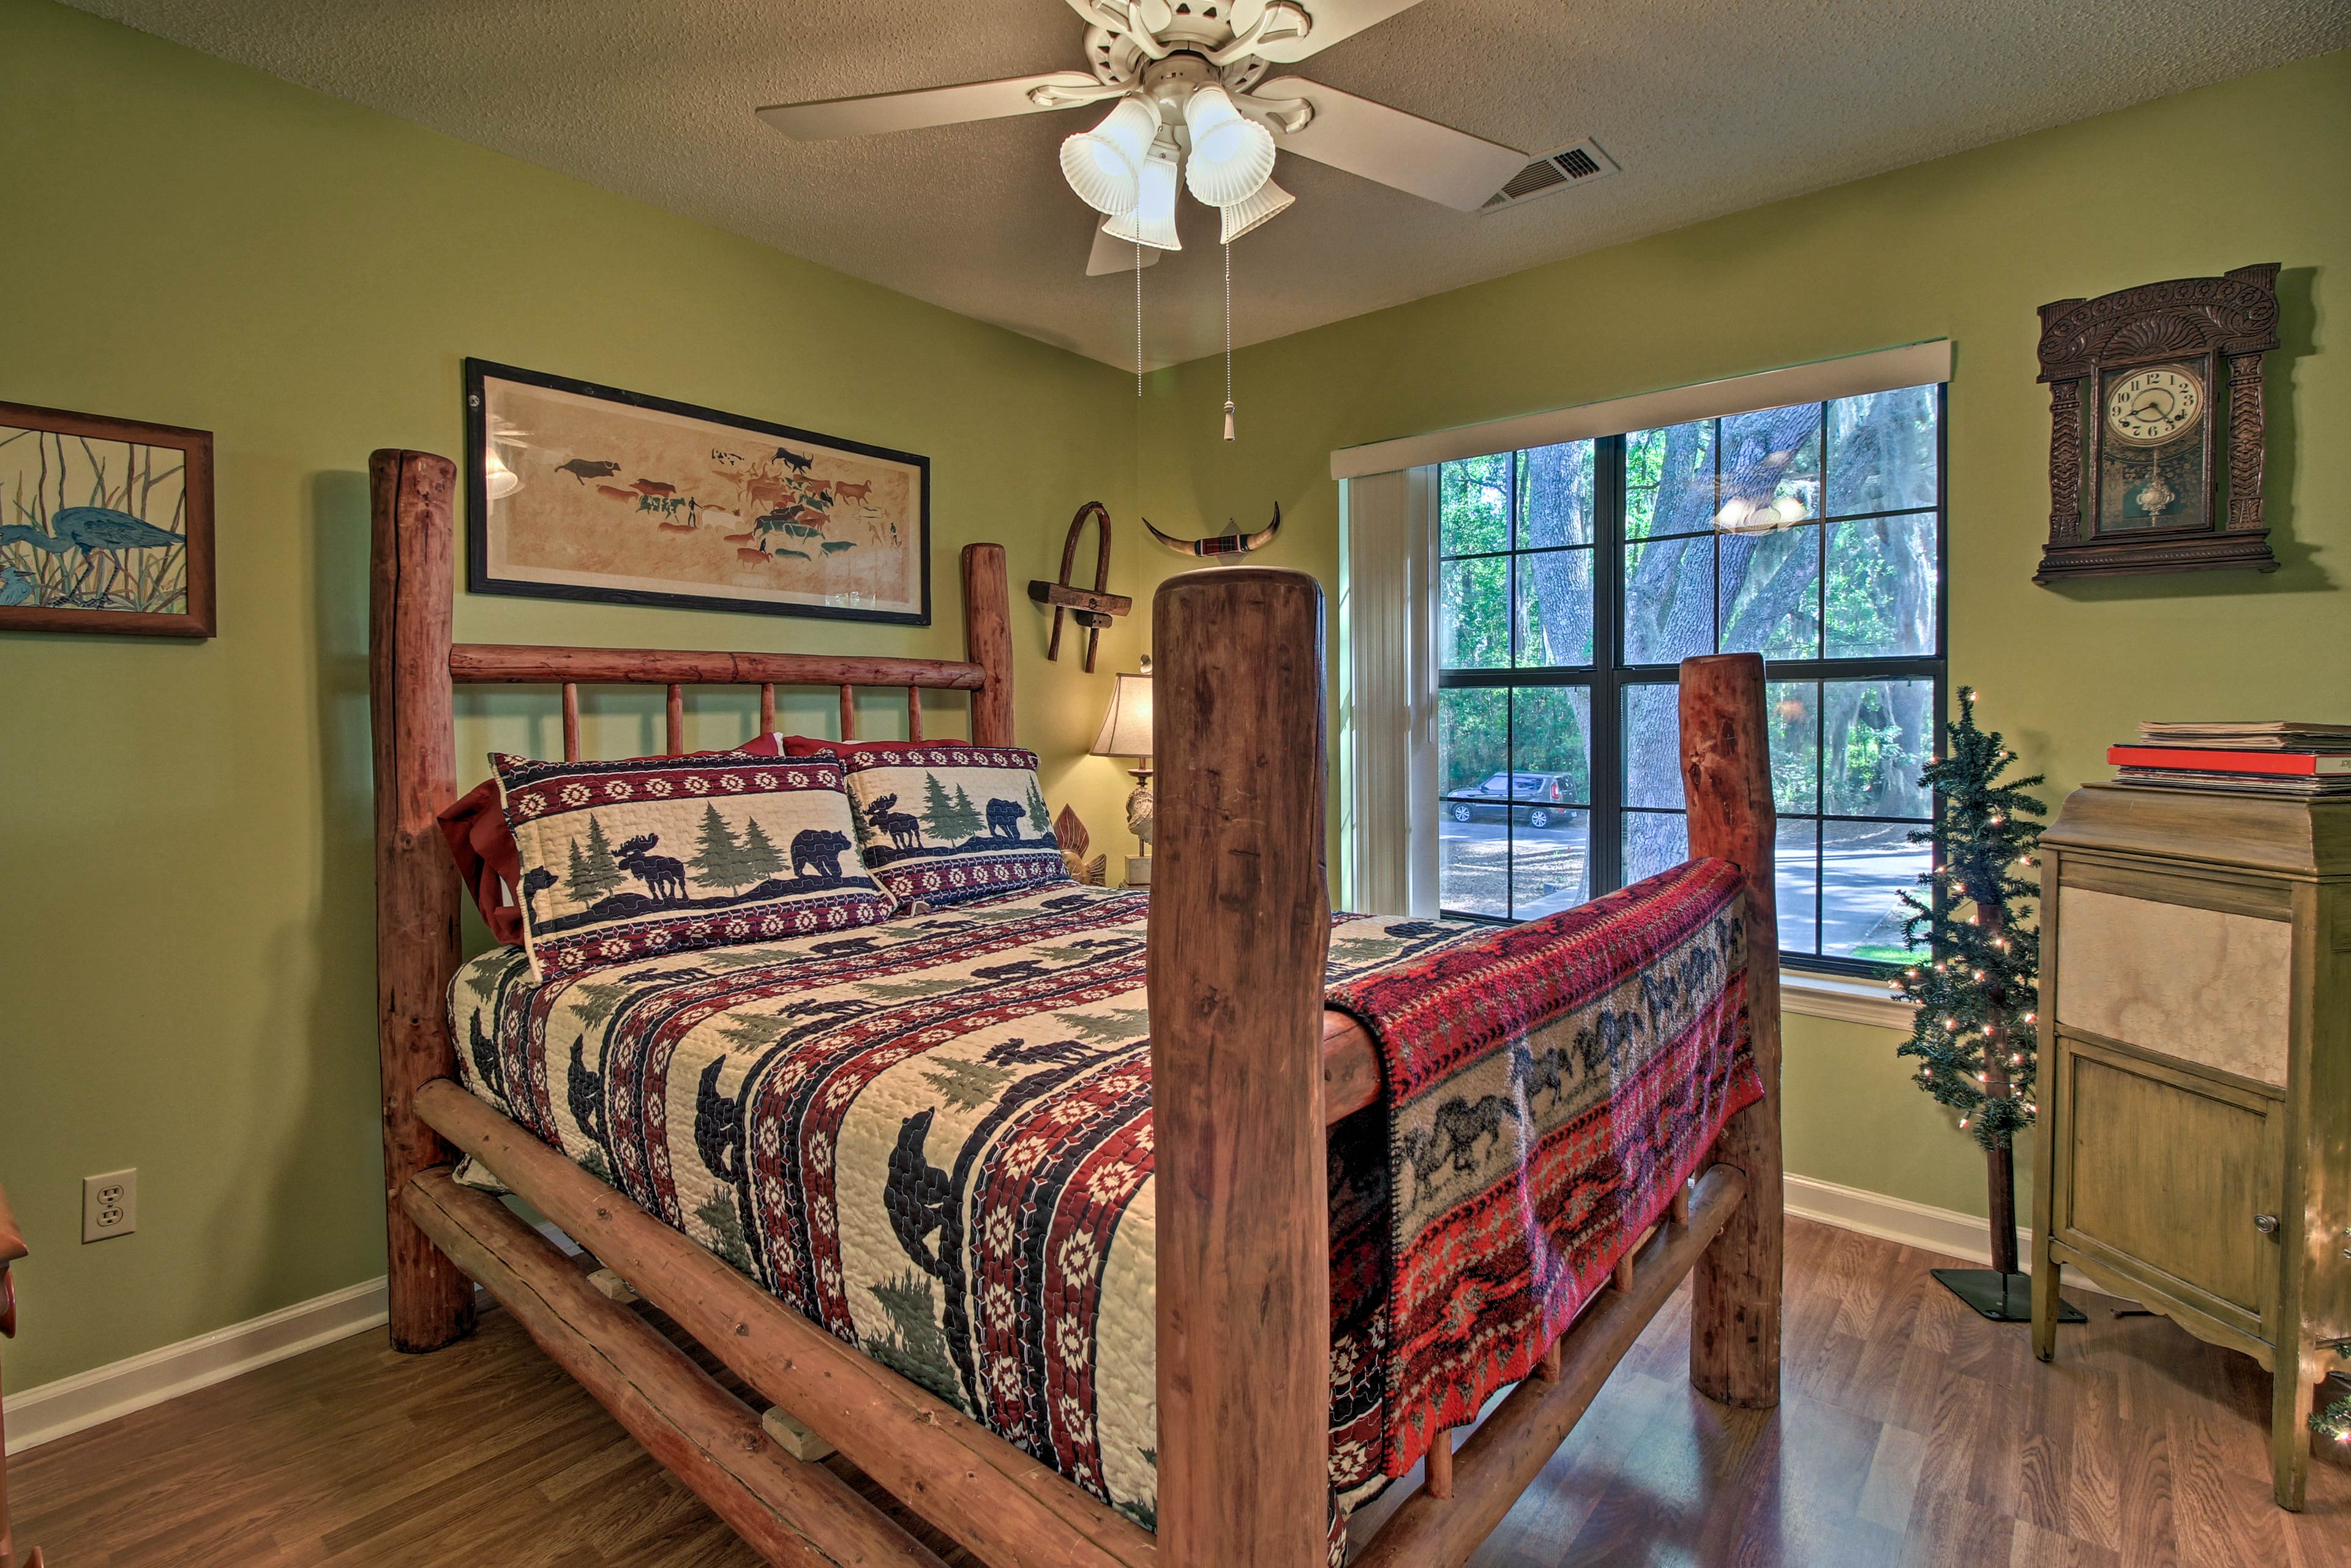 This bedroom includes a full-sized bed.